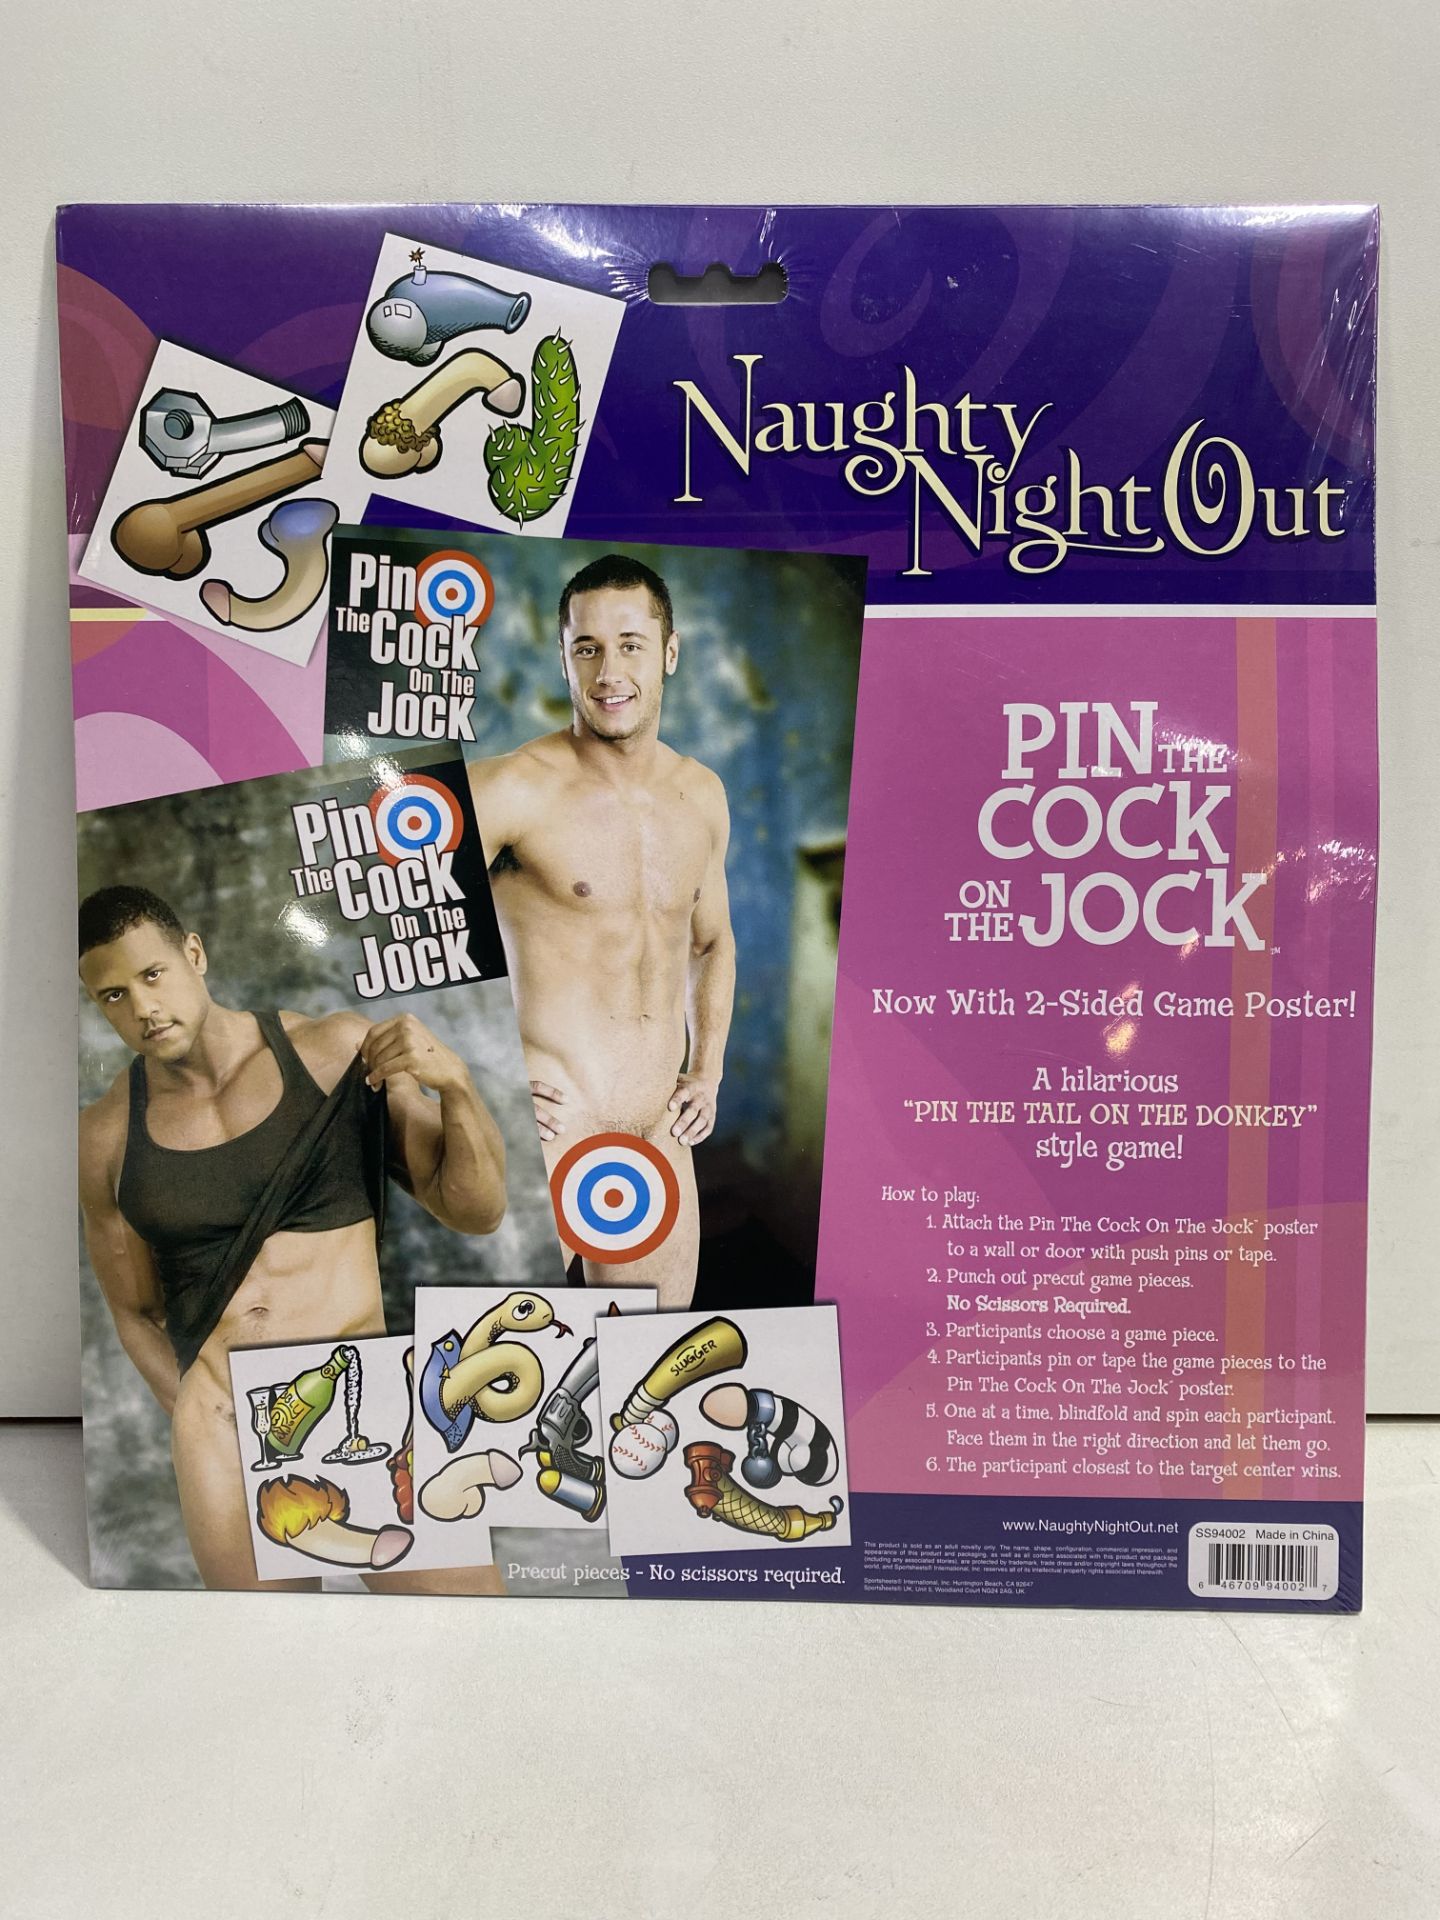 7 x Naughty Night Out Pin The Cock On The Jock Bachelorette Party Hens Night Game - Image 3 of 4